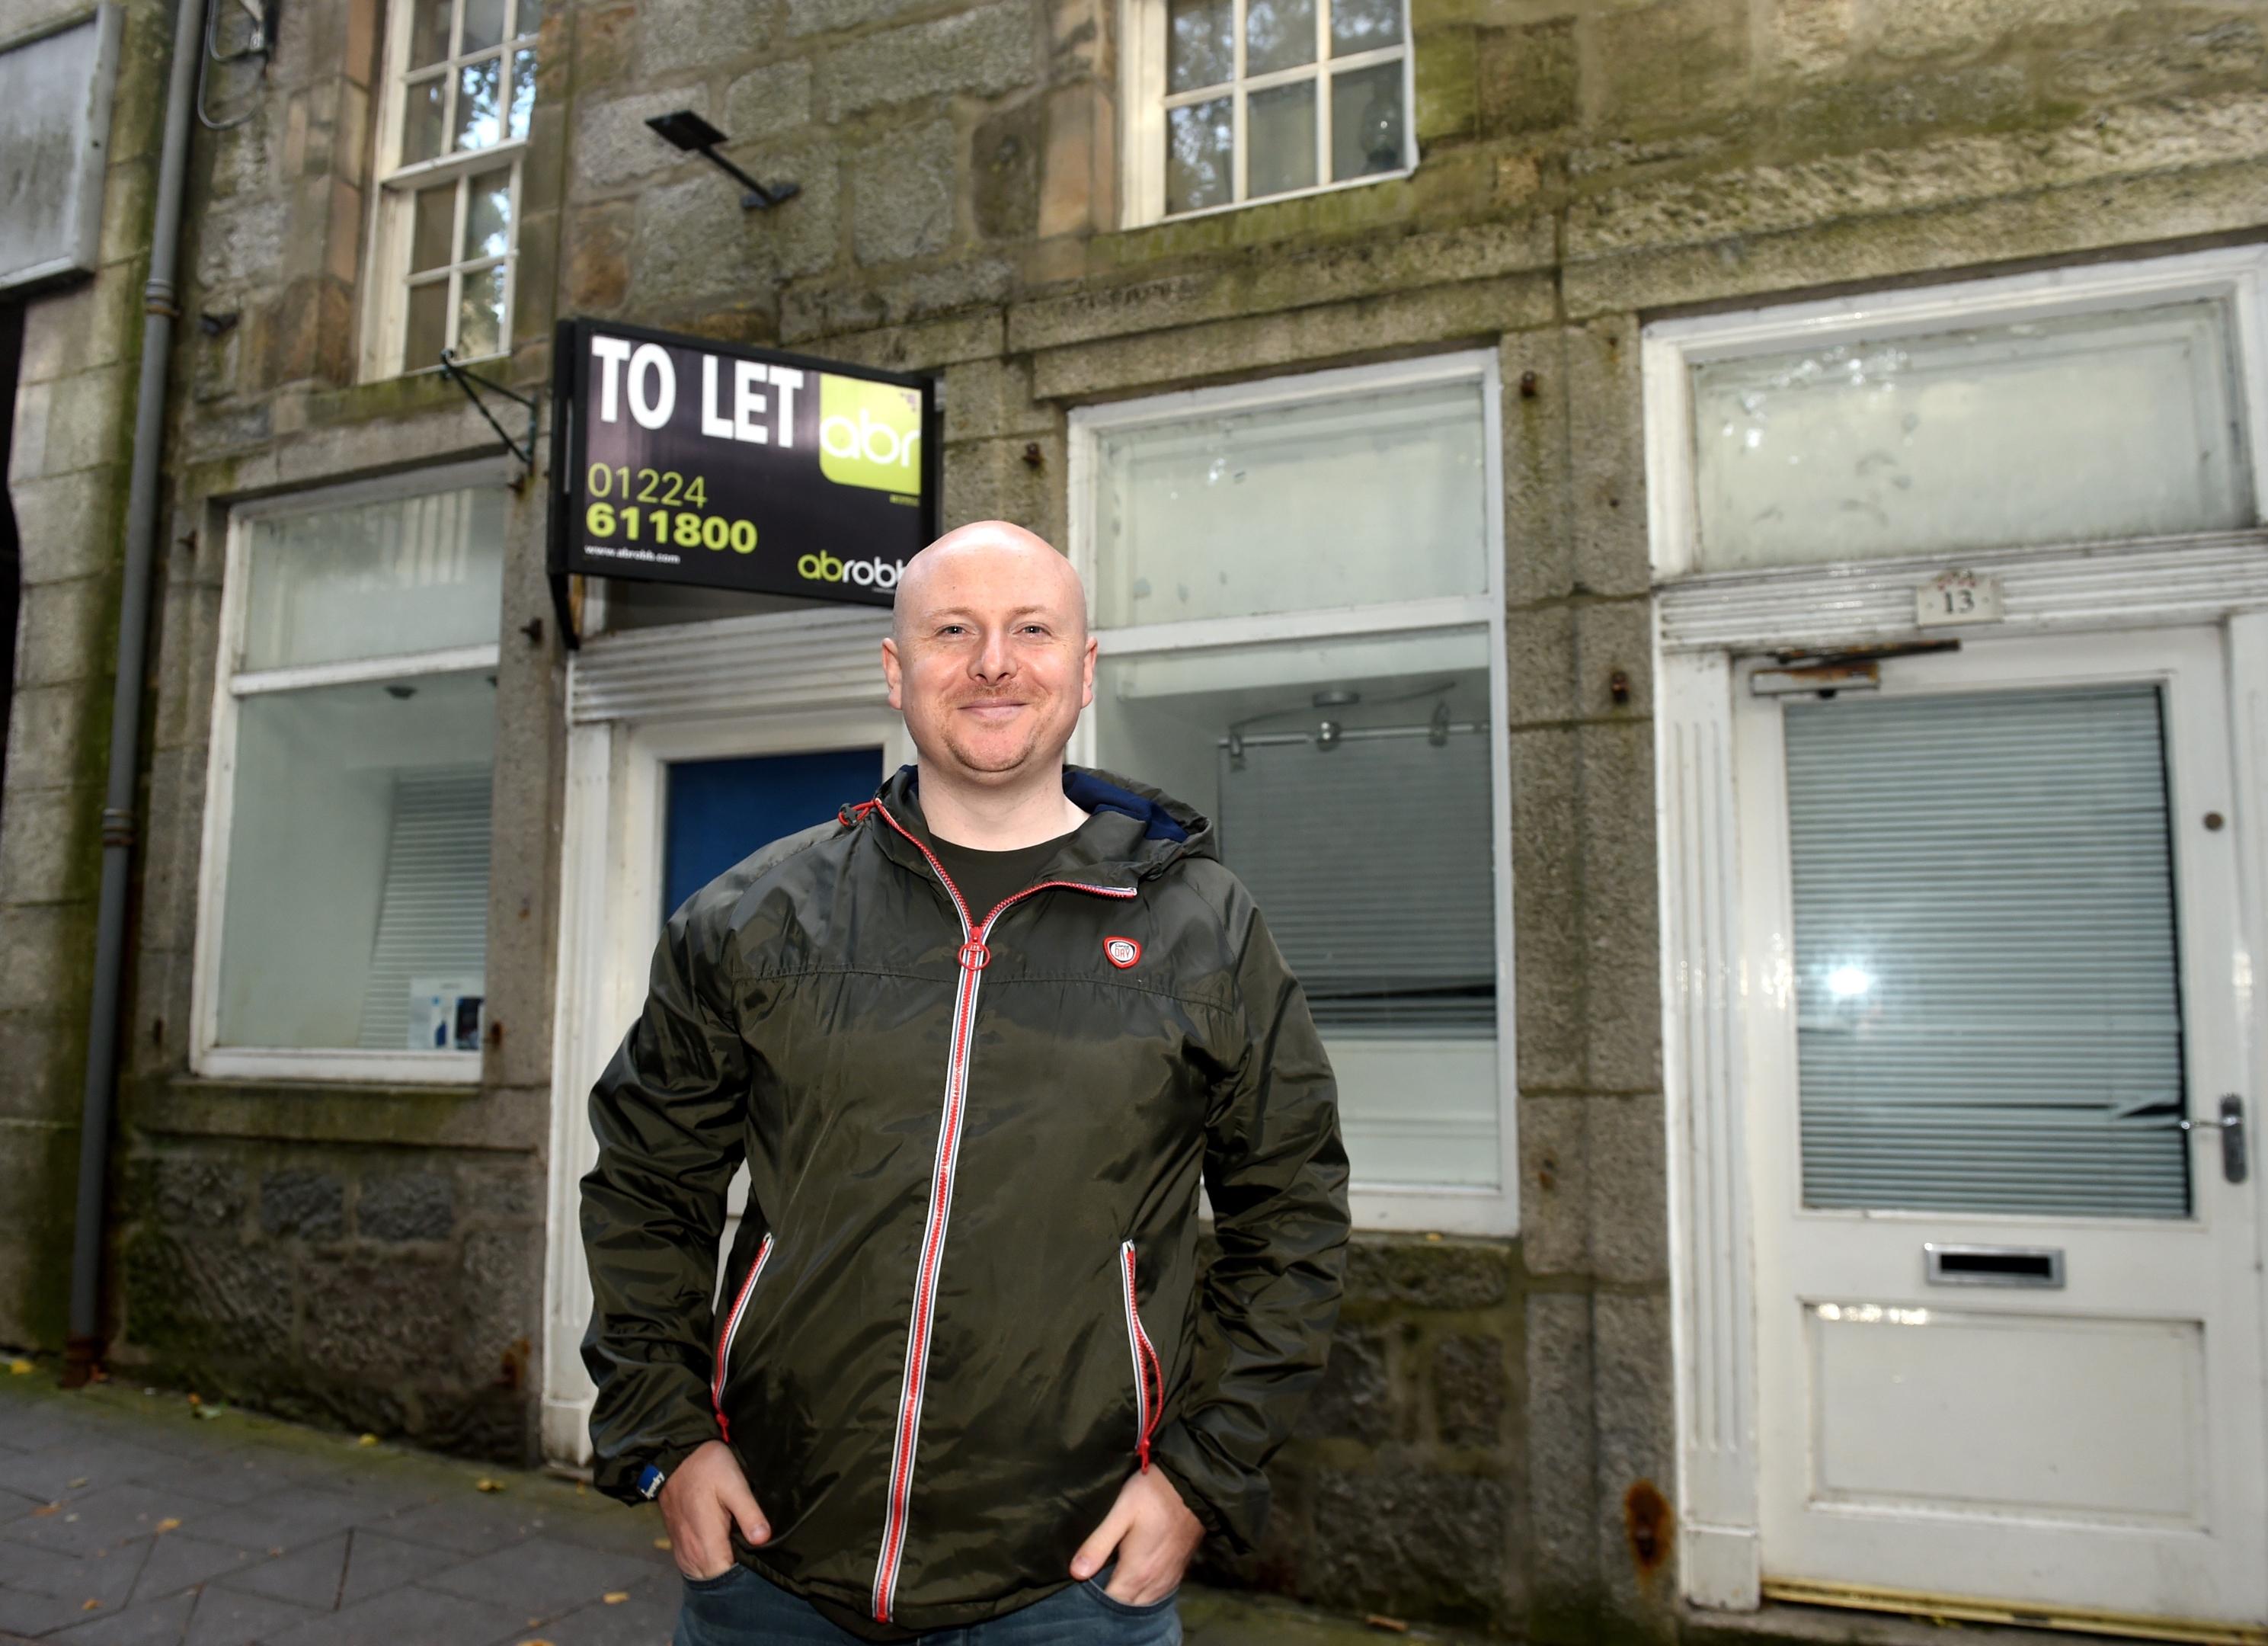 Nick is opening up a record cafe after being made redundant from his oil job.